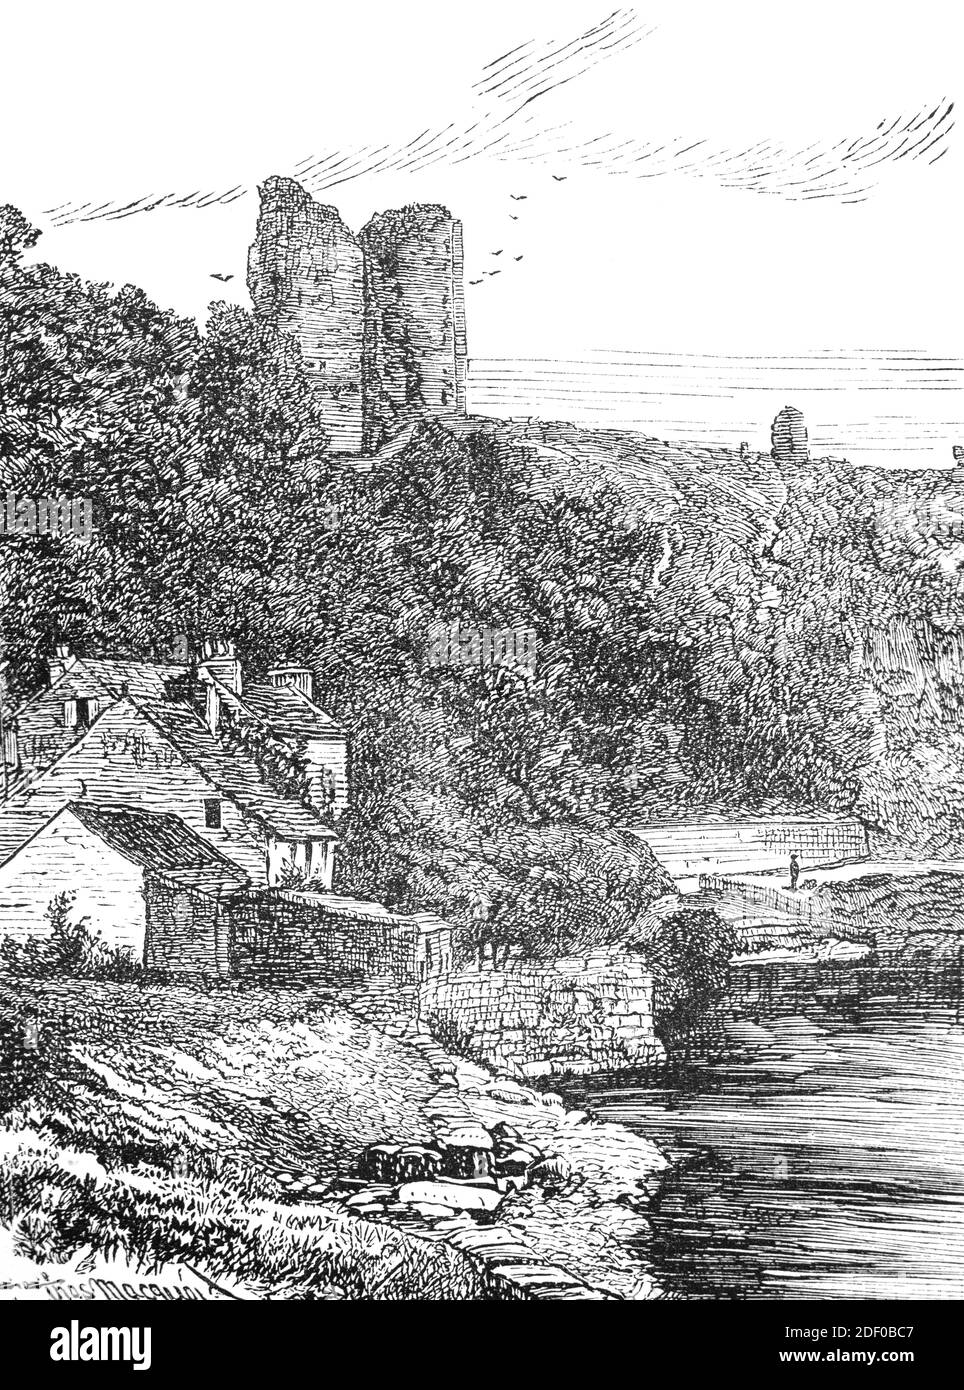 A 19th Century view of Knaresborough Castle, a ruined fortress first built by a Norman baron in c. 1100 on a cliff above the River Nidd in the town of Knaresborough, North Yorkshire, England. The castle was rebuilt between 1307 and 1312 by Edward I and later completed by Edward II, including the great keep.   Philippa of Hainault took possession of the castle in 1331, and her son, John of Gaunt acquired the castle in 1372, adding it to the vast holdings of the Duchy of Lancaster. The castle was taken by Parliamentarian troops in 1644 during the Civil War, and largely destroyed in 1648 because Stock Photo